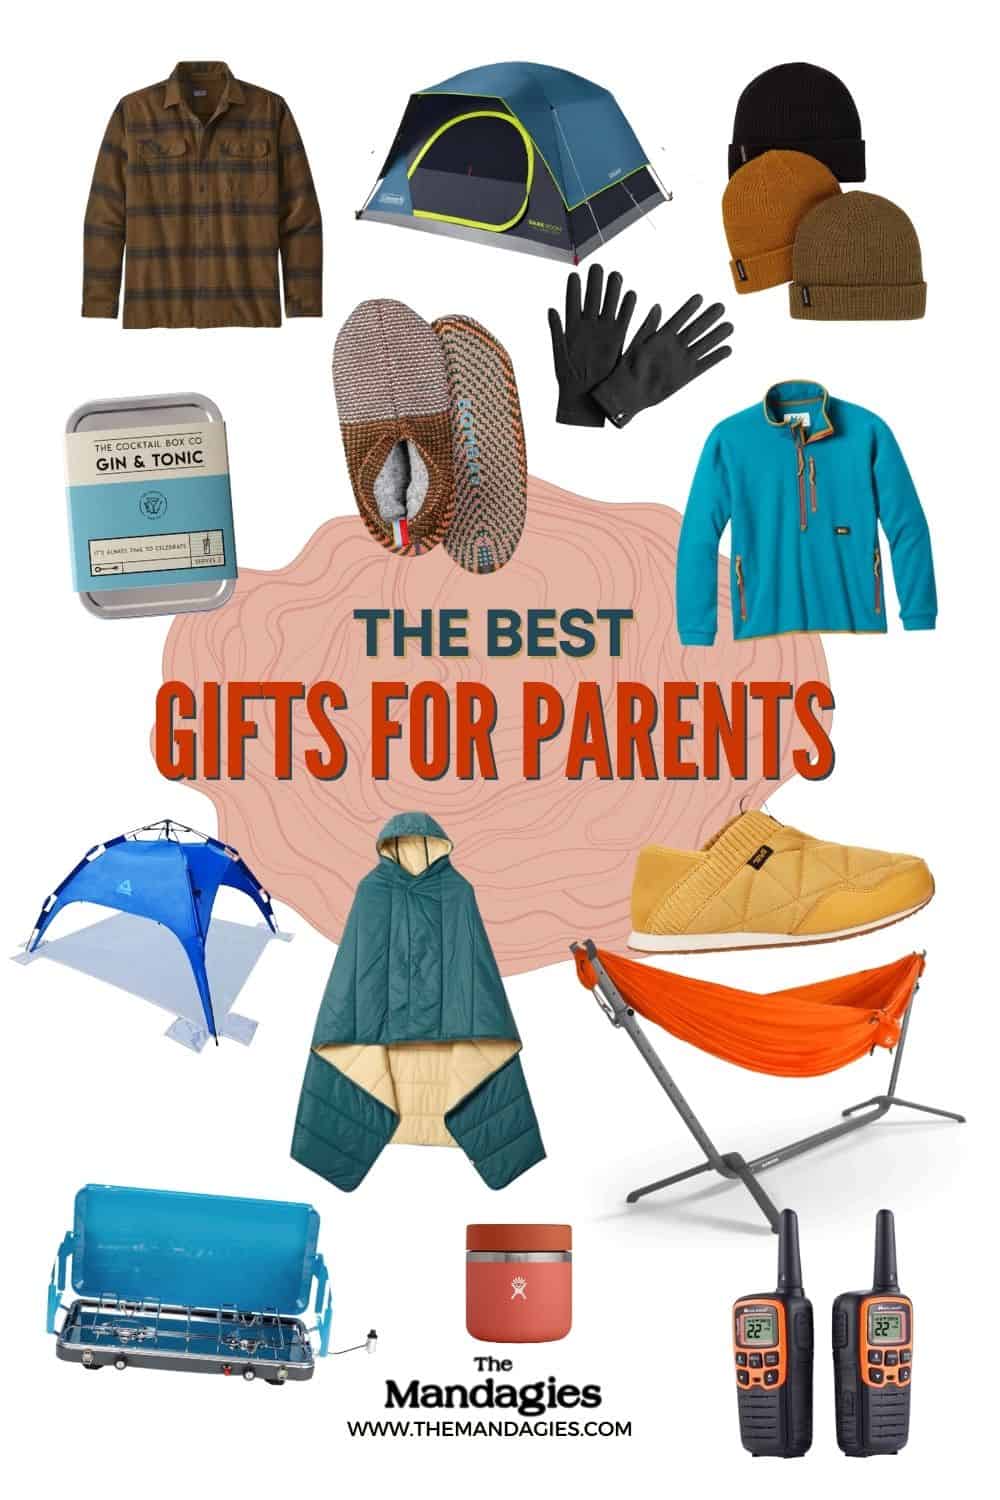 27 Popular Outdoor Gifts For Kids To Empower Curiosity - The Mandagies